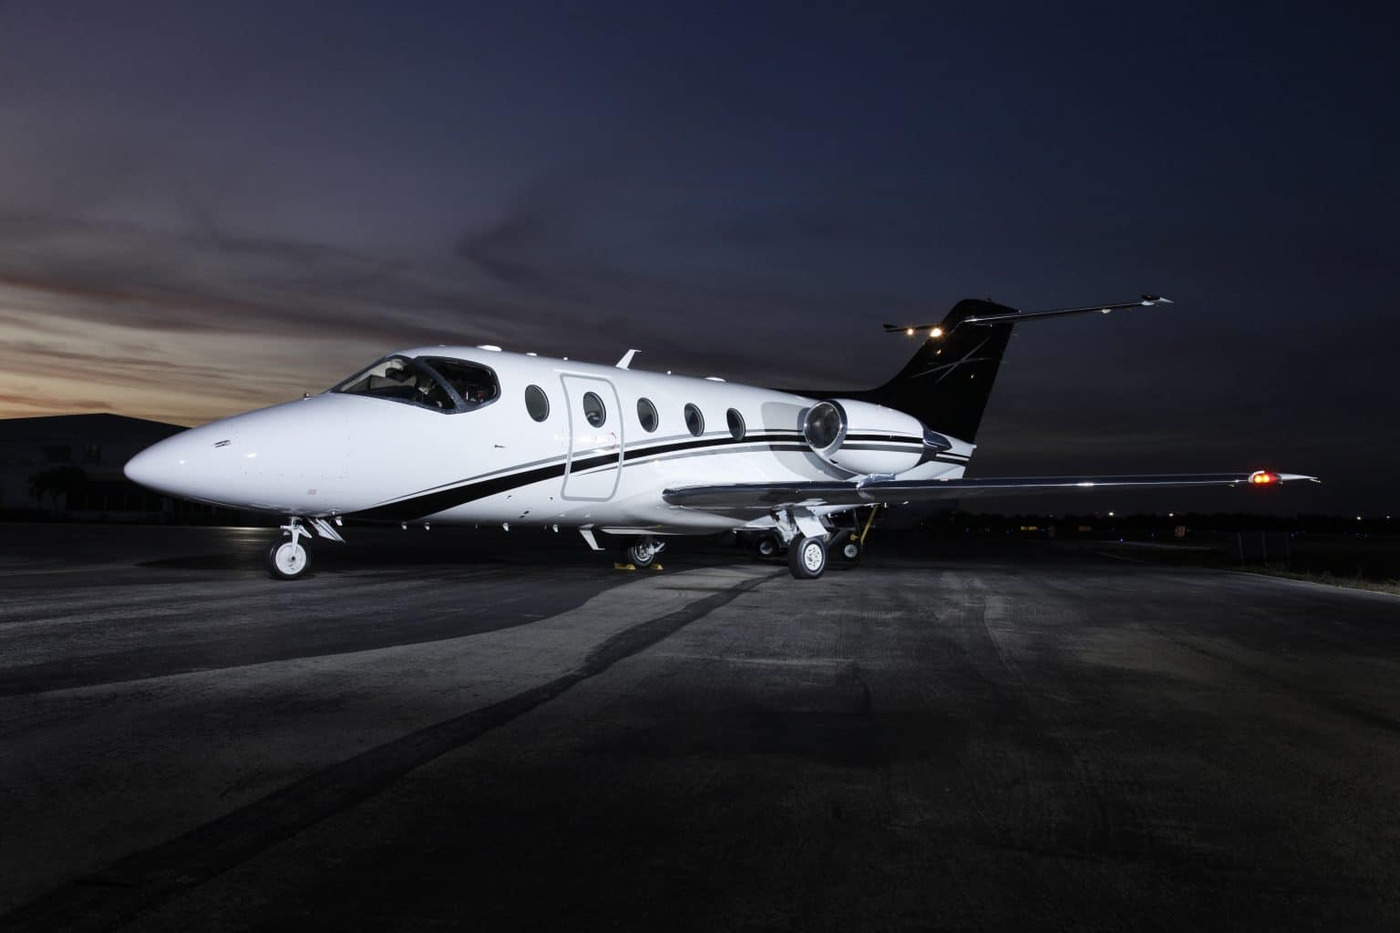 Atlantic Jet Partners is a family of companies offering aircraft and services spanning jet sales & acquisitions, fractional aircraft ownership, empty leg jet charters, TBO aircraft extension, aircraft avionics, private aircraft insurance, and aircraft maintenance.